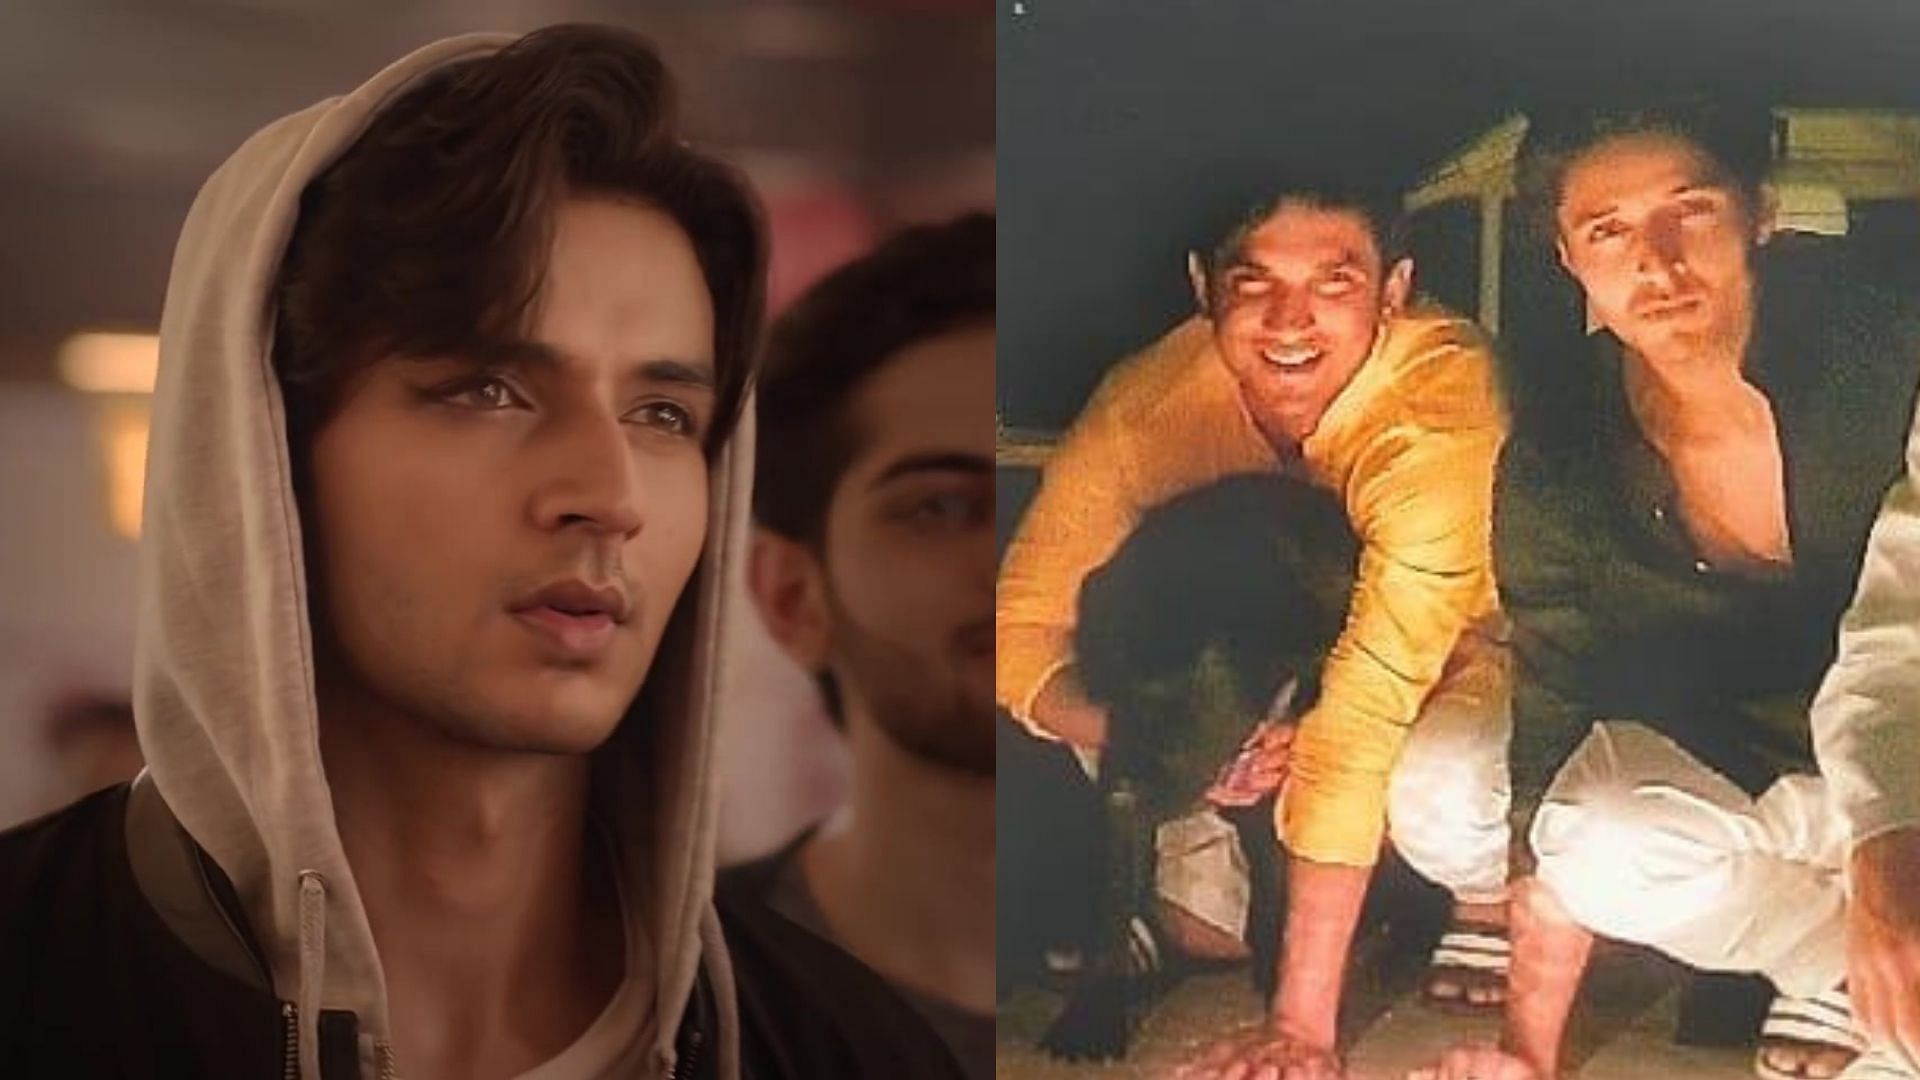 Siddharth Gupta on living with late Sushant Singh Rajput for almost a year.